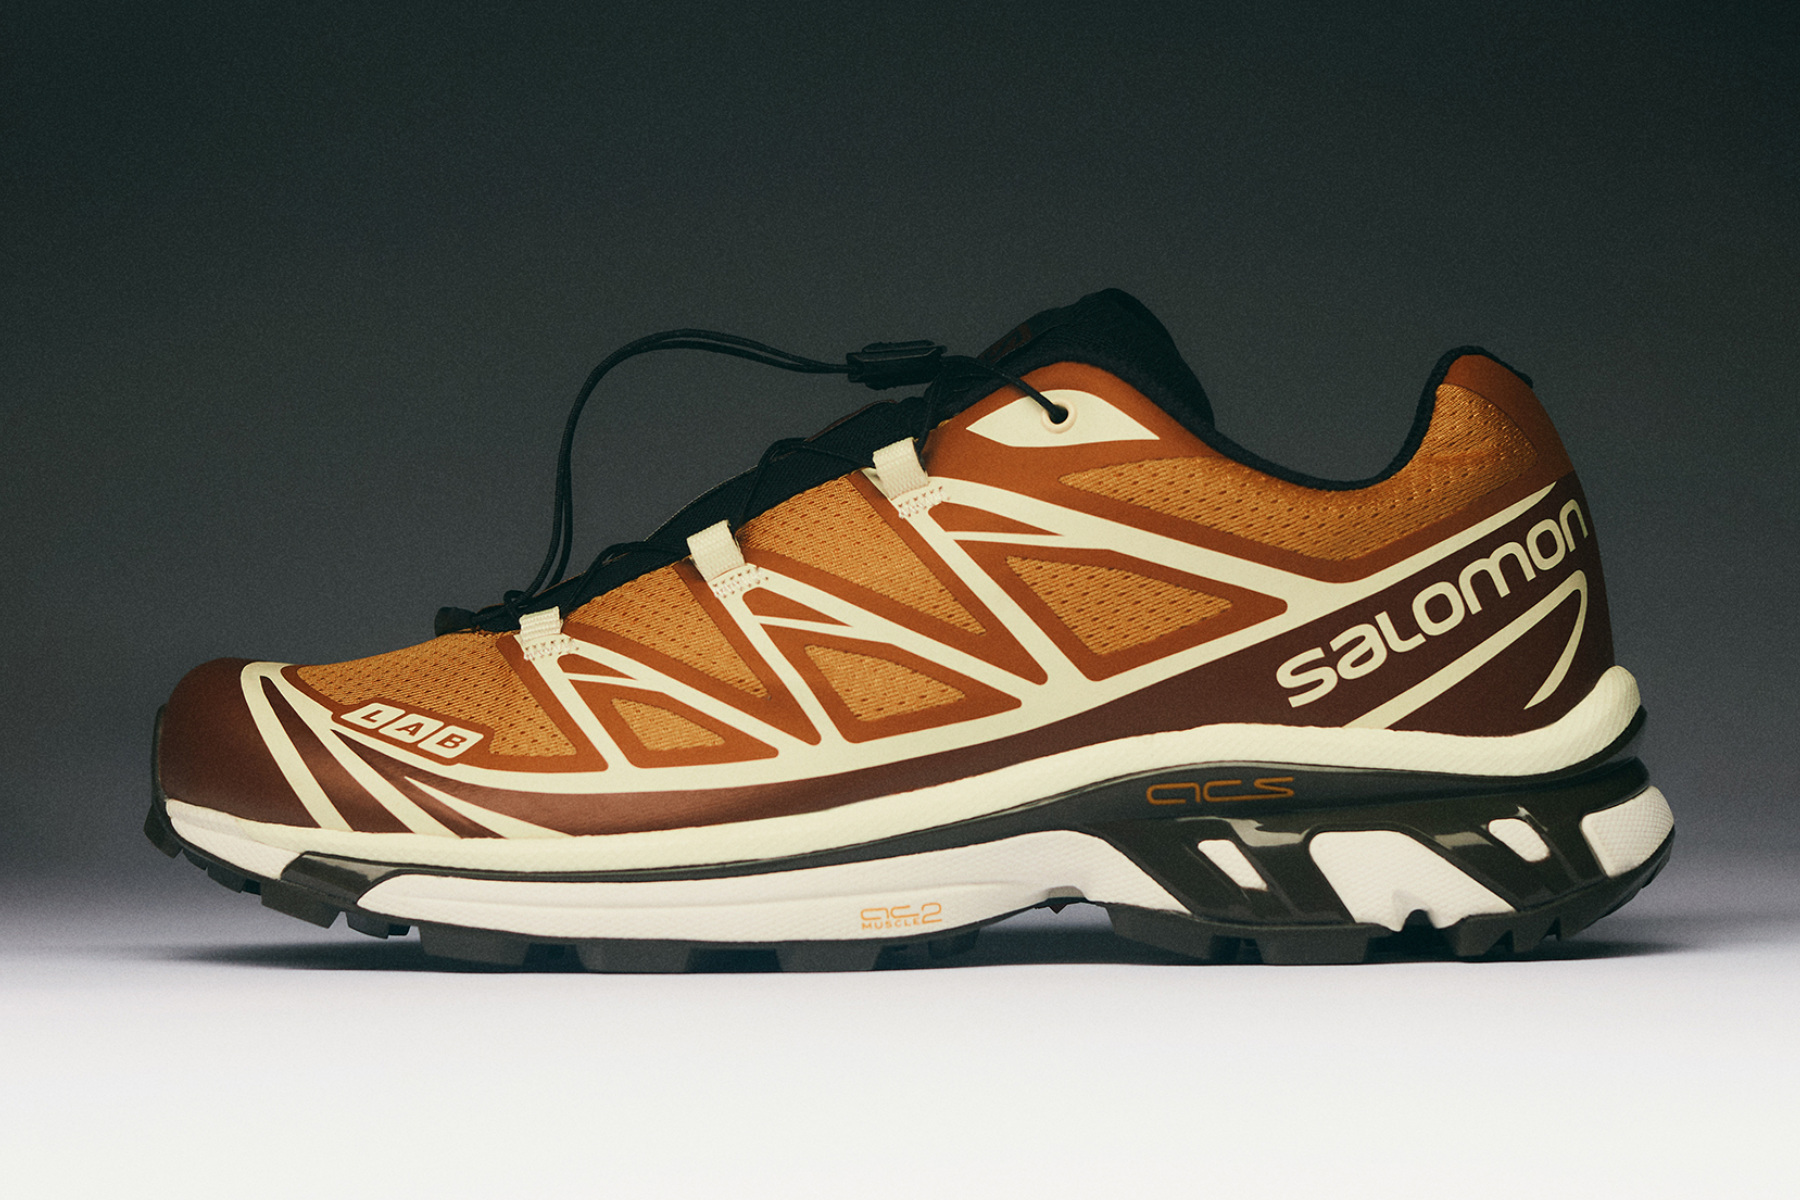 END. has reworked Salomon's XT-6 silhouette for Fall/Winter 2023.